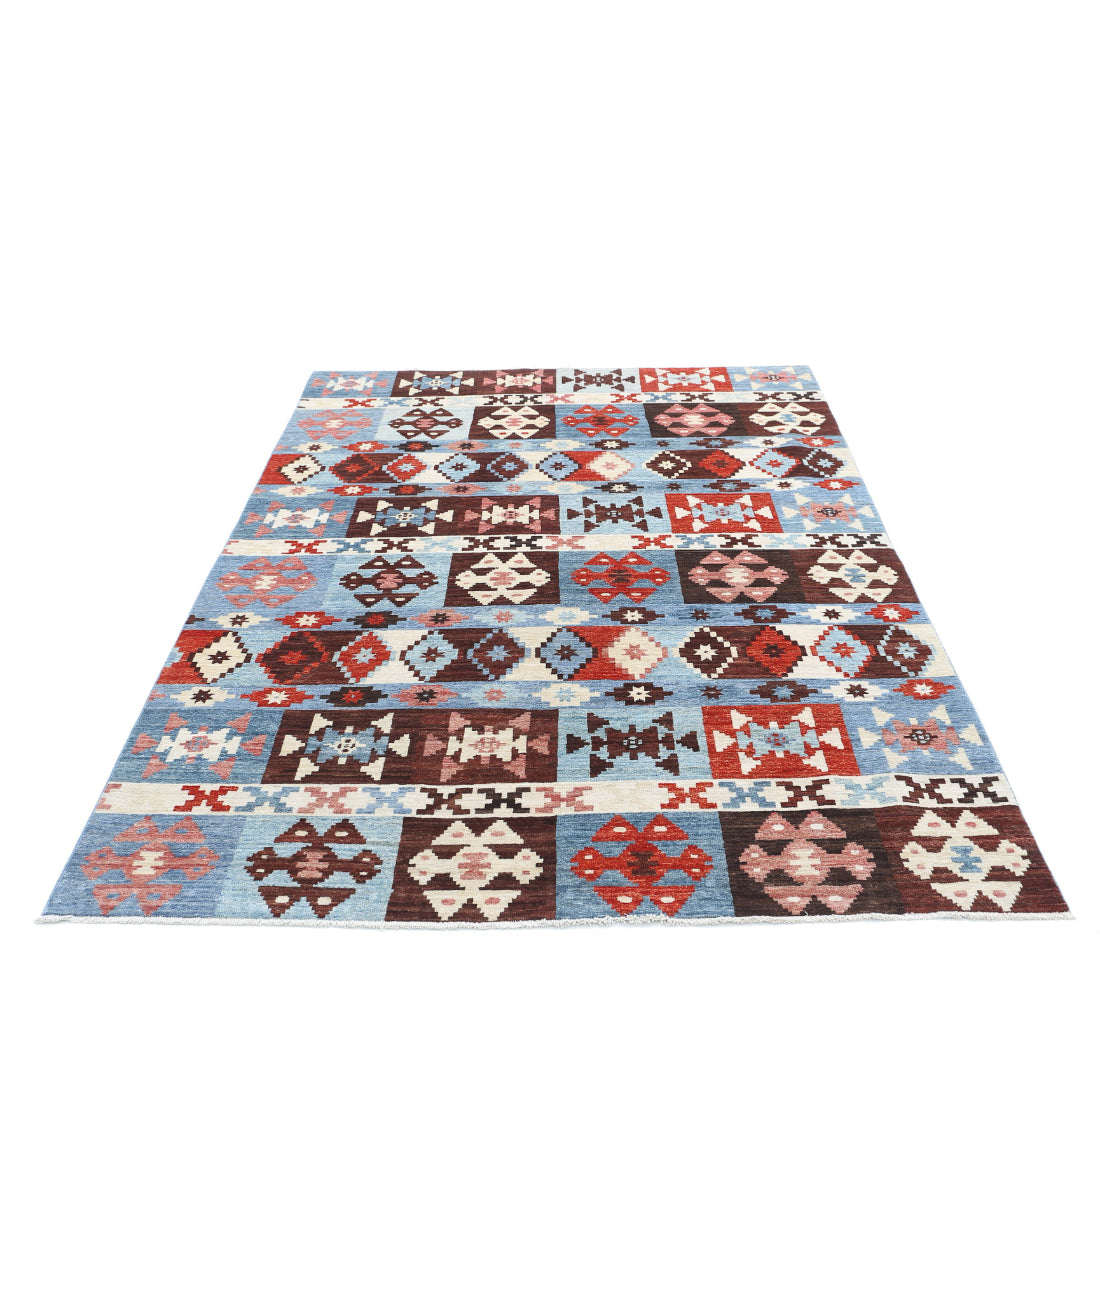 Hand Knotted Modcar Wool Rug - 5'7'' x 7'11'' 5'7'' x 7'11'' (168 X 238) / Multi / Multi